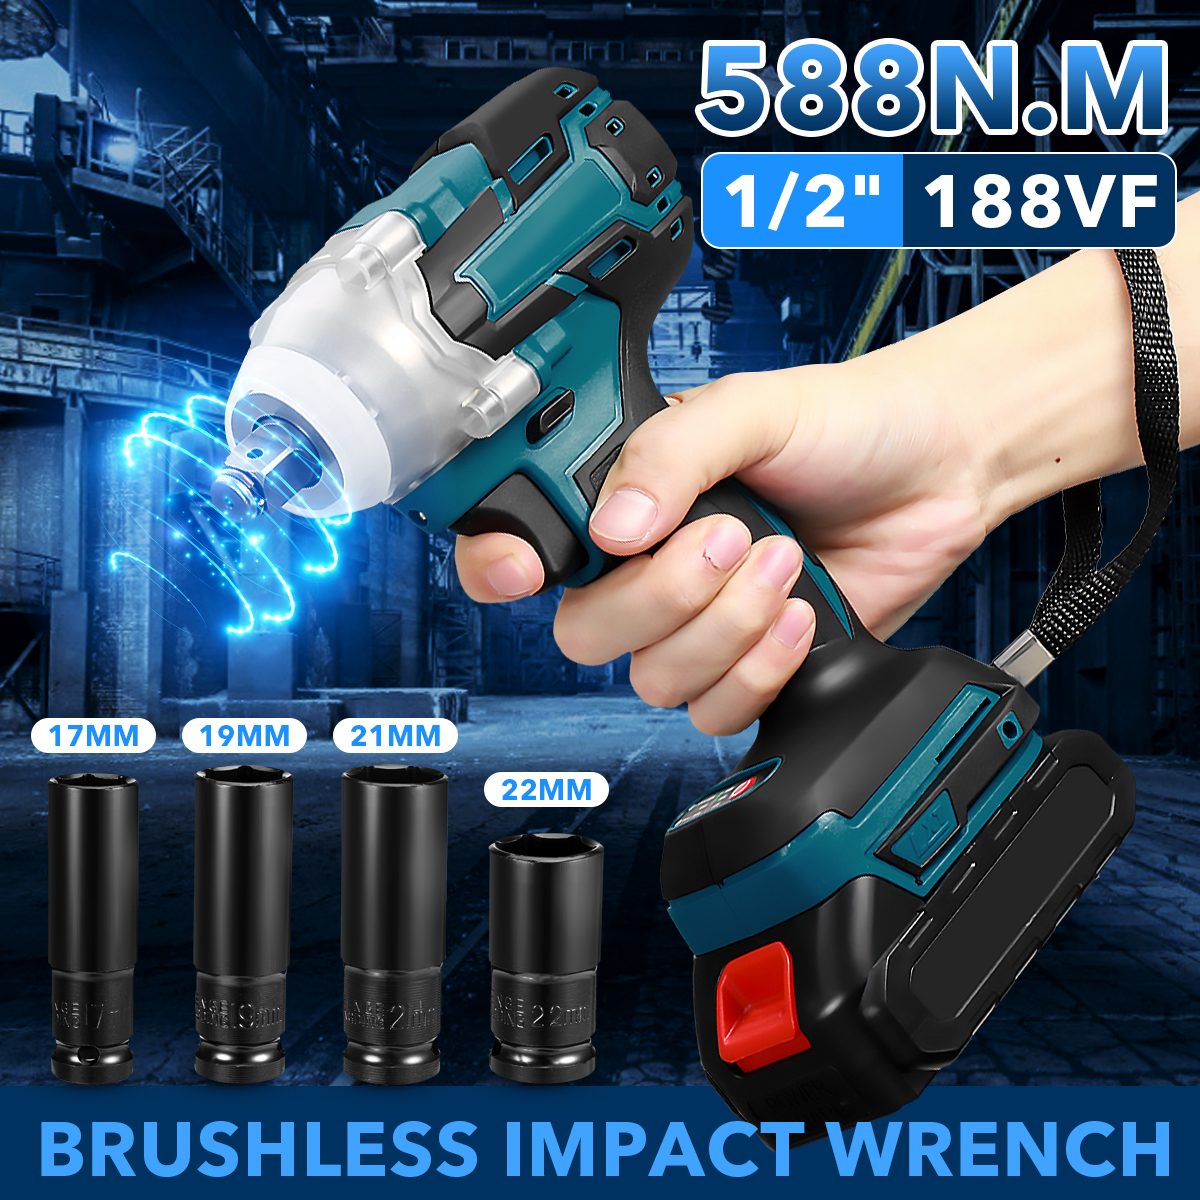 188VF-588Nm-Li-Ion-Cordless-Electric-12quot-Wrench-Socket-Rechargeable-Power-Tool-W-12pcs-Battery-1856253-2